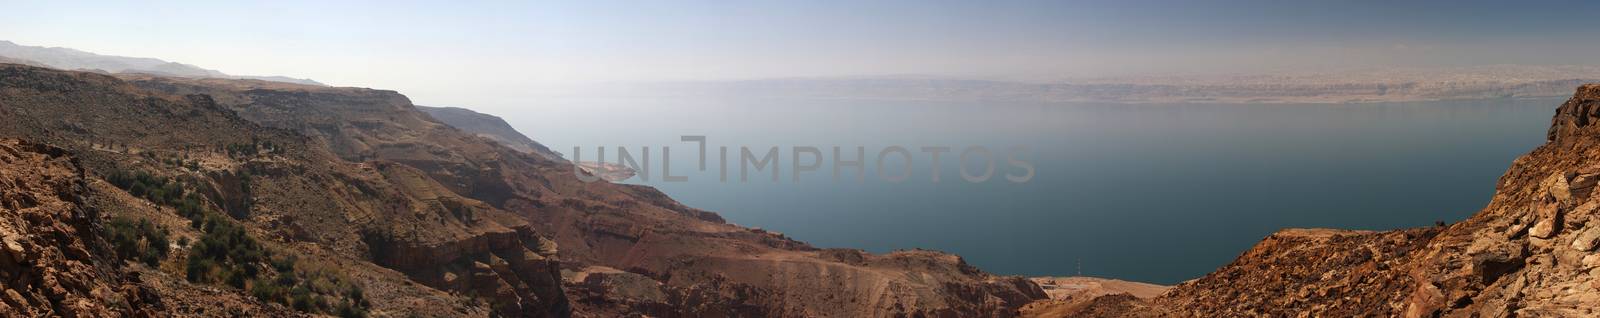 Dead sea coast on Jordan site - Israel in the distance (made from 18 vertical 10mpix pictures)